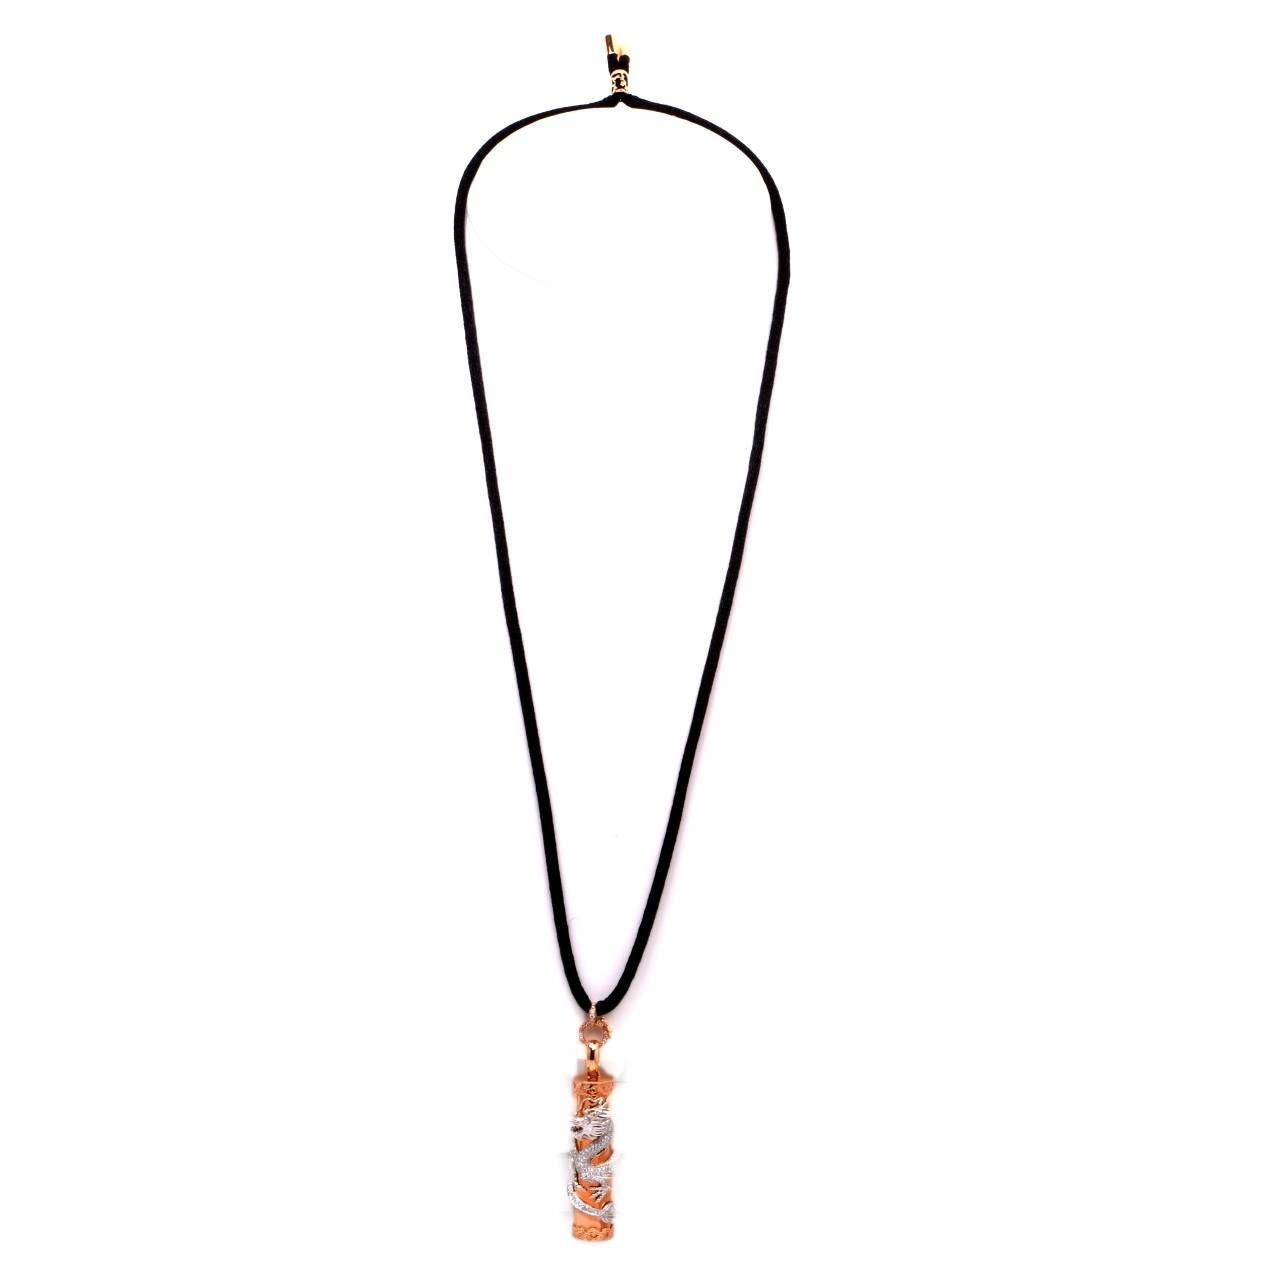 This elegant estate drop pendant necklace is crafted in solid 18K rose gold. Showcasing  a lovely and stylish black rope chain necklace that is centered with a cylinder shaped pendant. The pendant is centered with a detailed carving of a dragon that